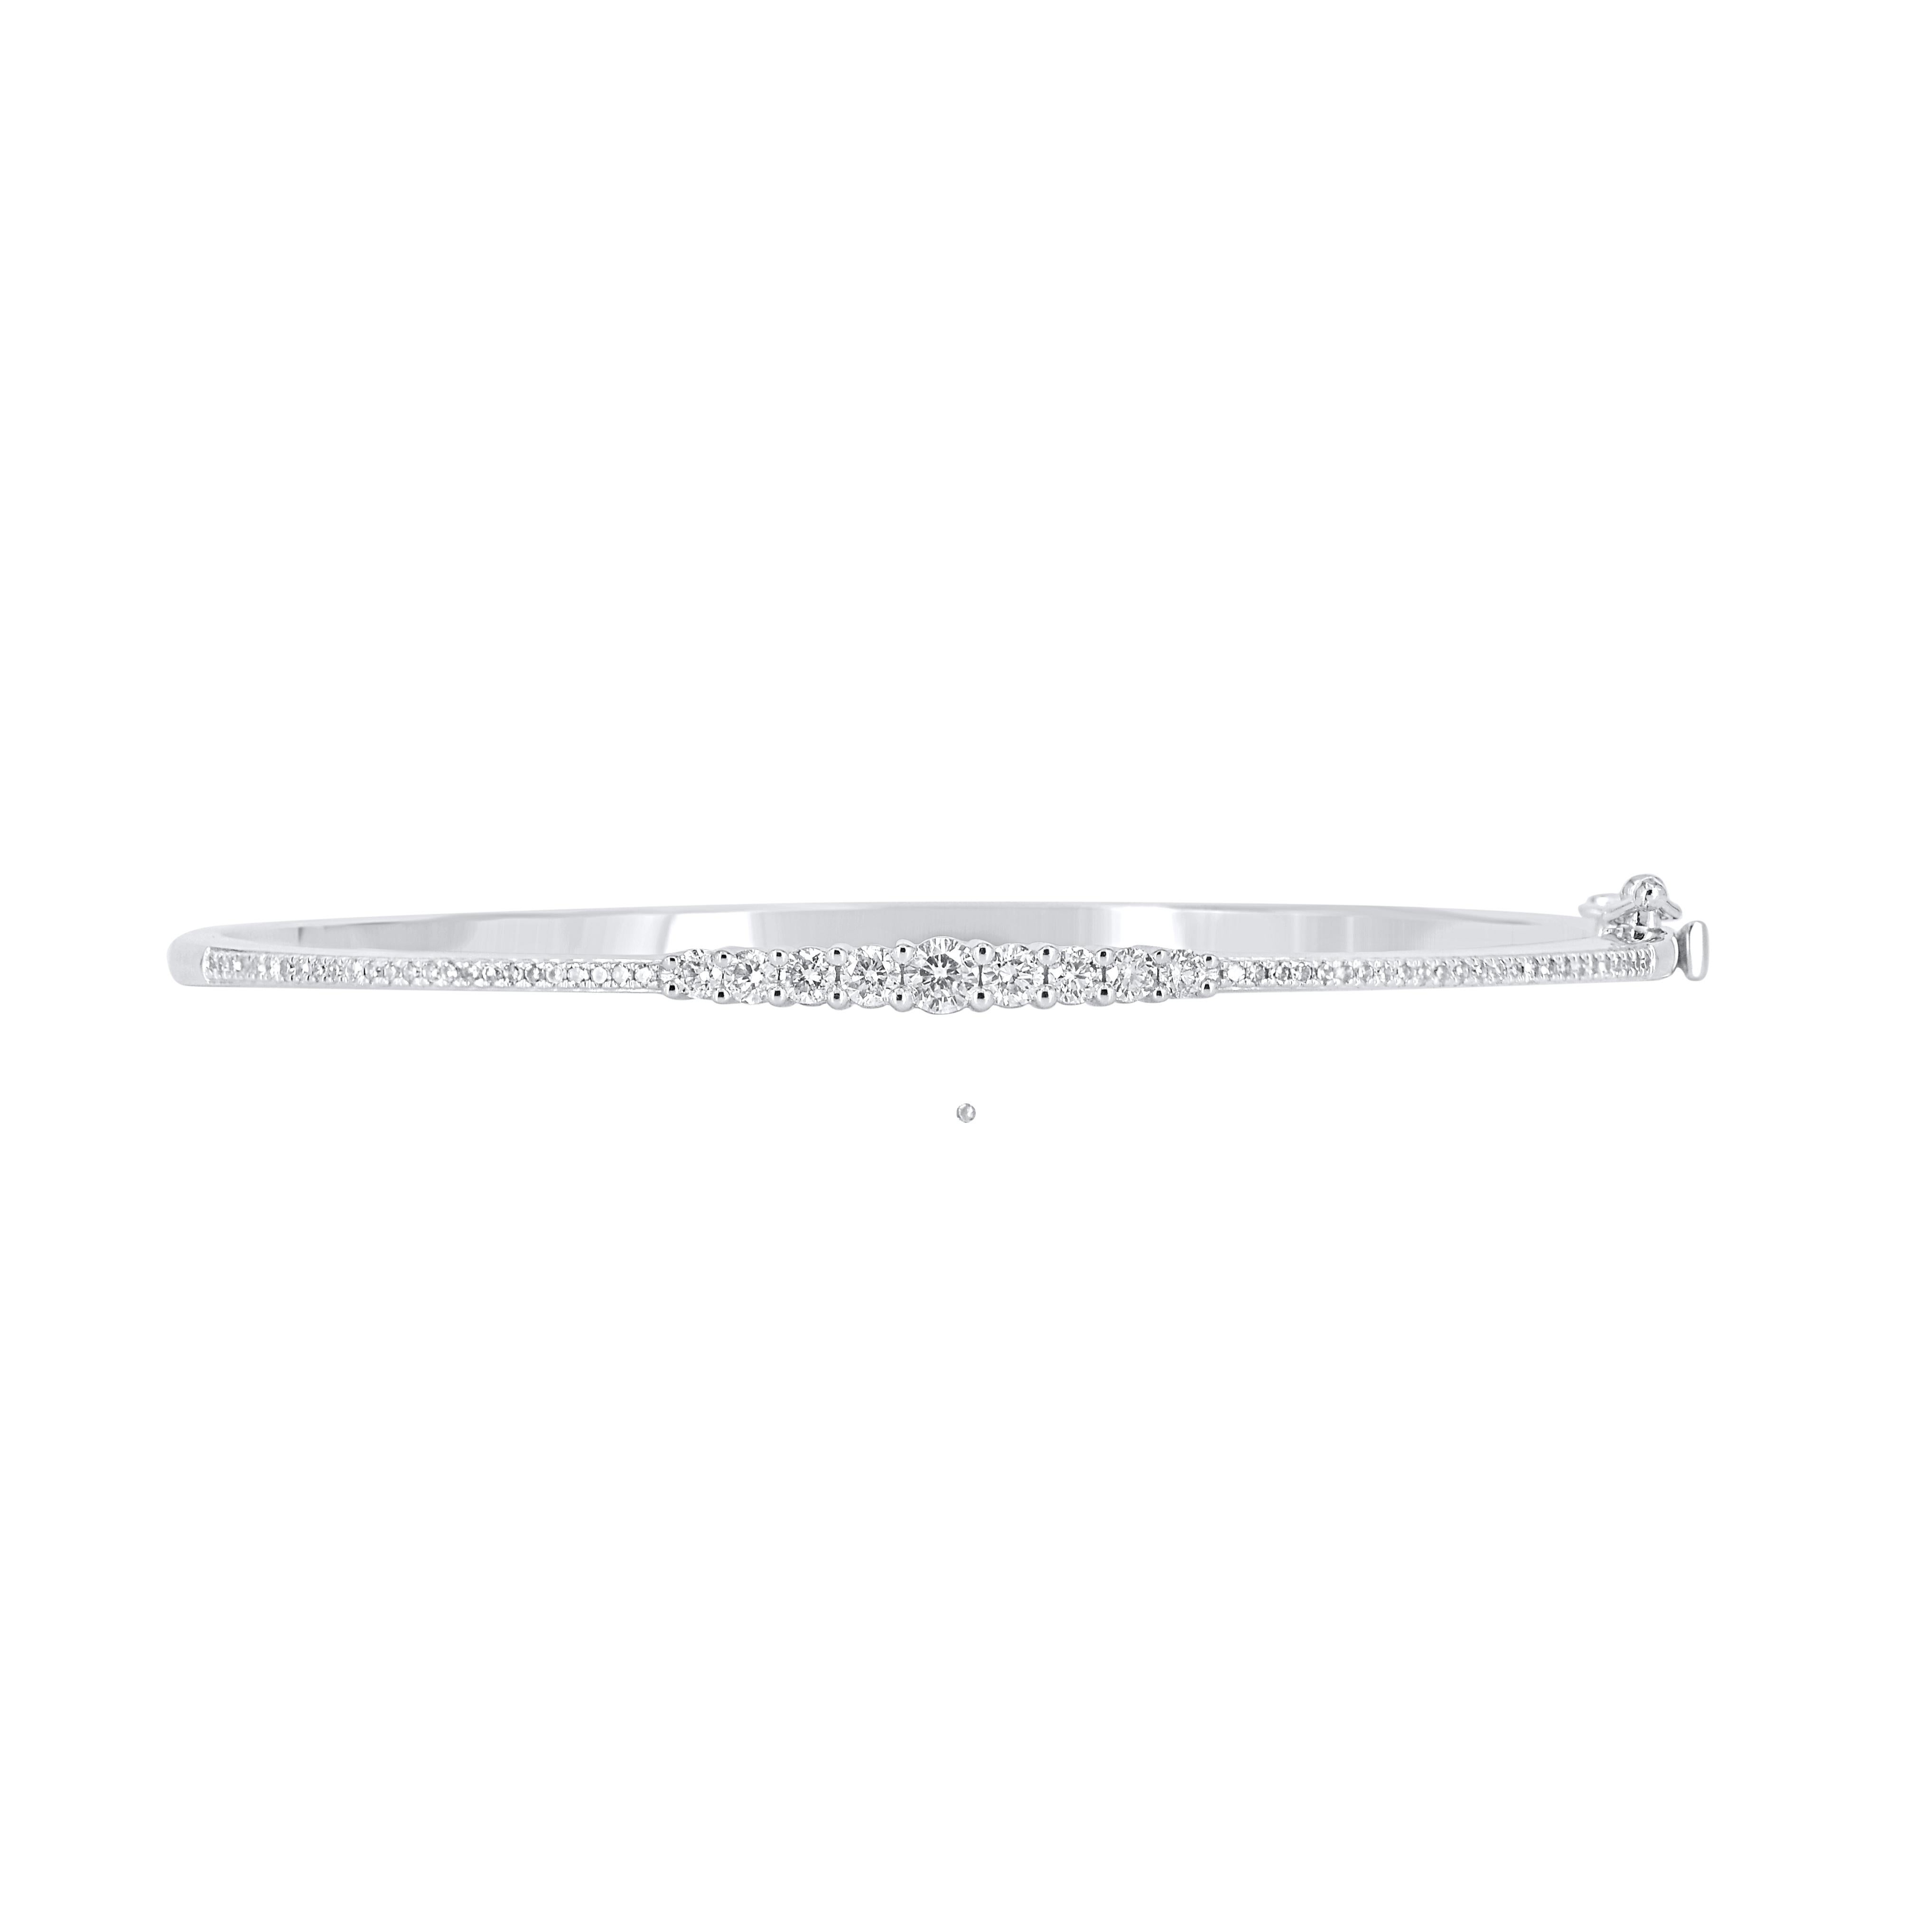 Classic and sophisticated, this diamond bangle bracelet pairs well with any attire.
This Shimmering bangle bracelet features 61 natural round single cut & brilliant cut diamonds in prong setting and crafted in 18kt white gold. Diamonds are graded